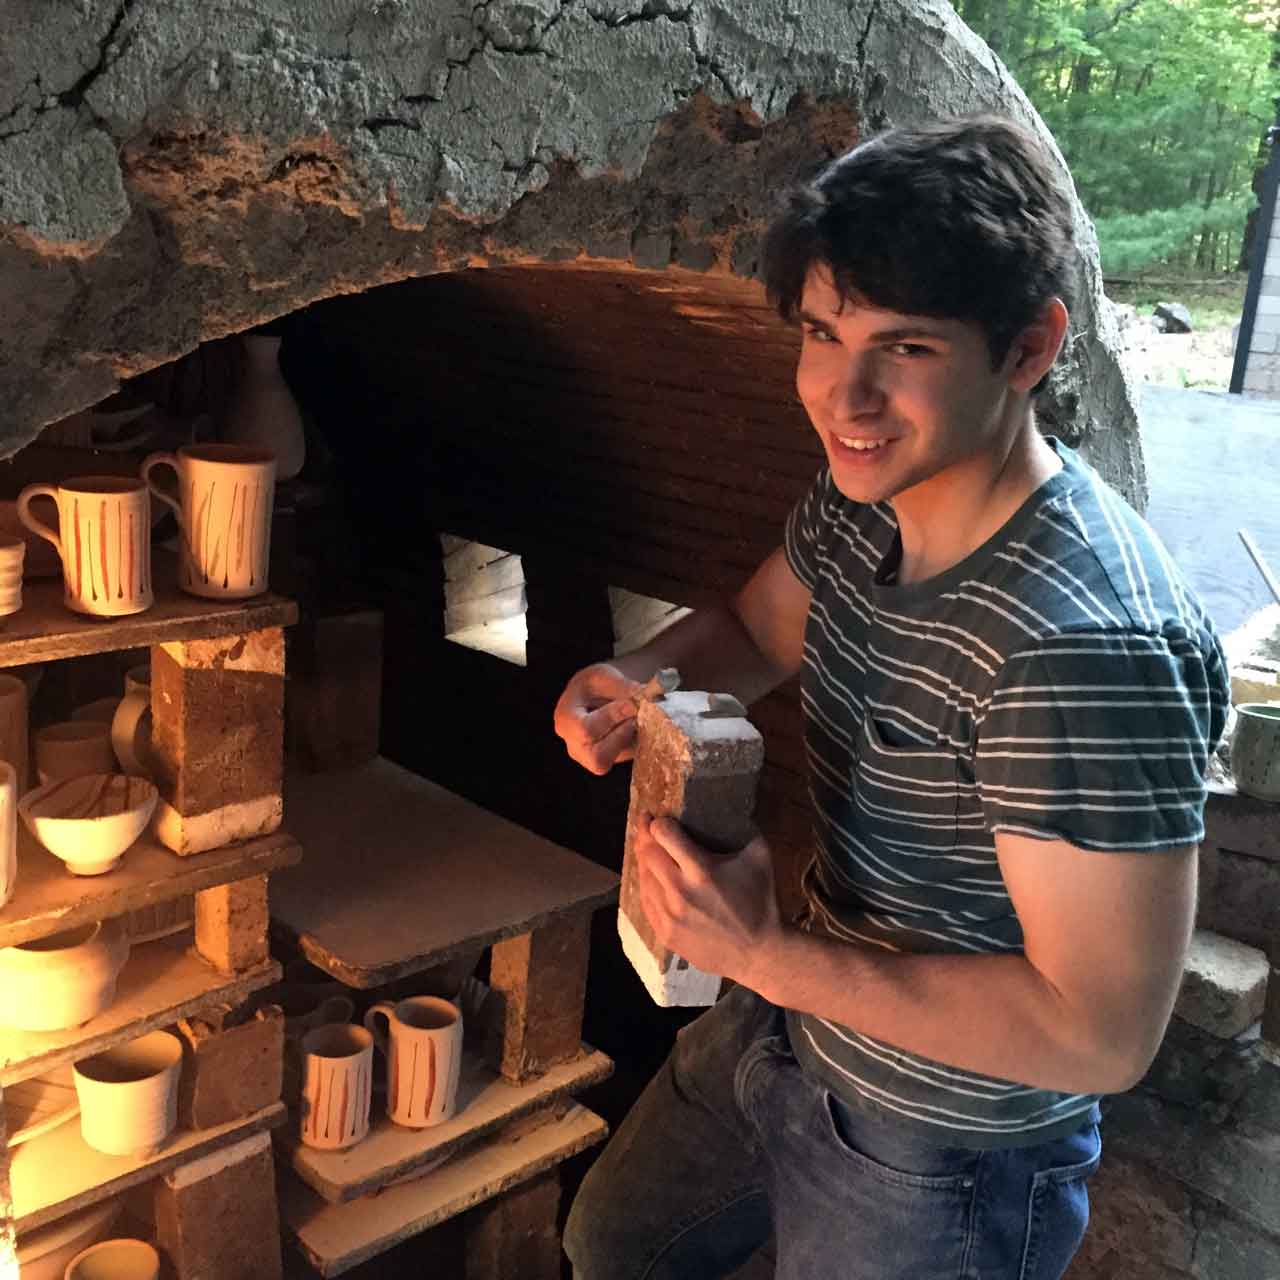 Kevin Beckerman helps to load the kiln; here he's putting wadding between the bricks and shelves so that they don't stick together during the firing.